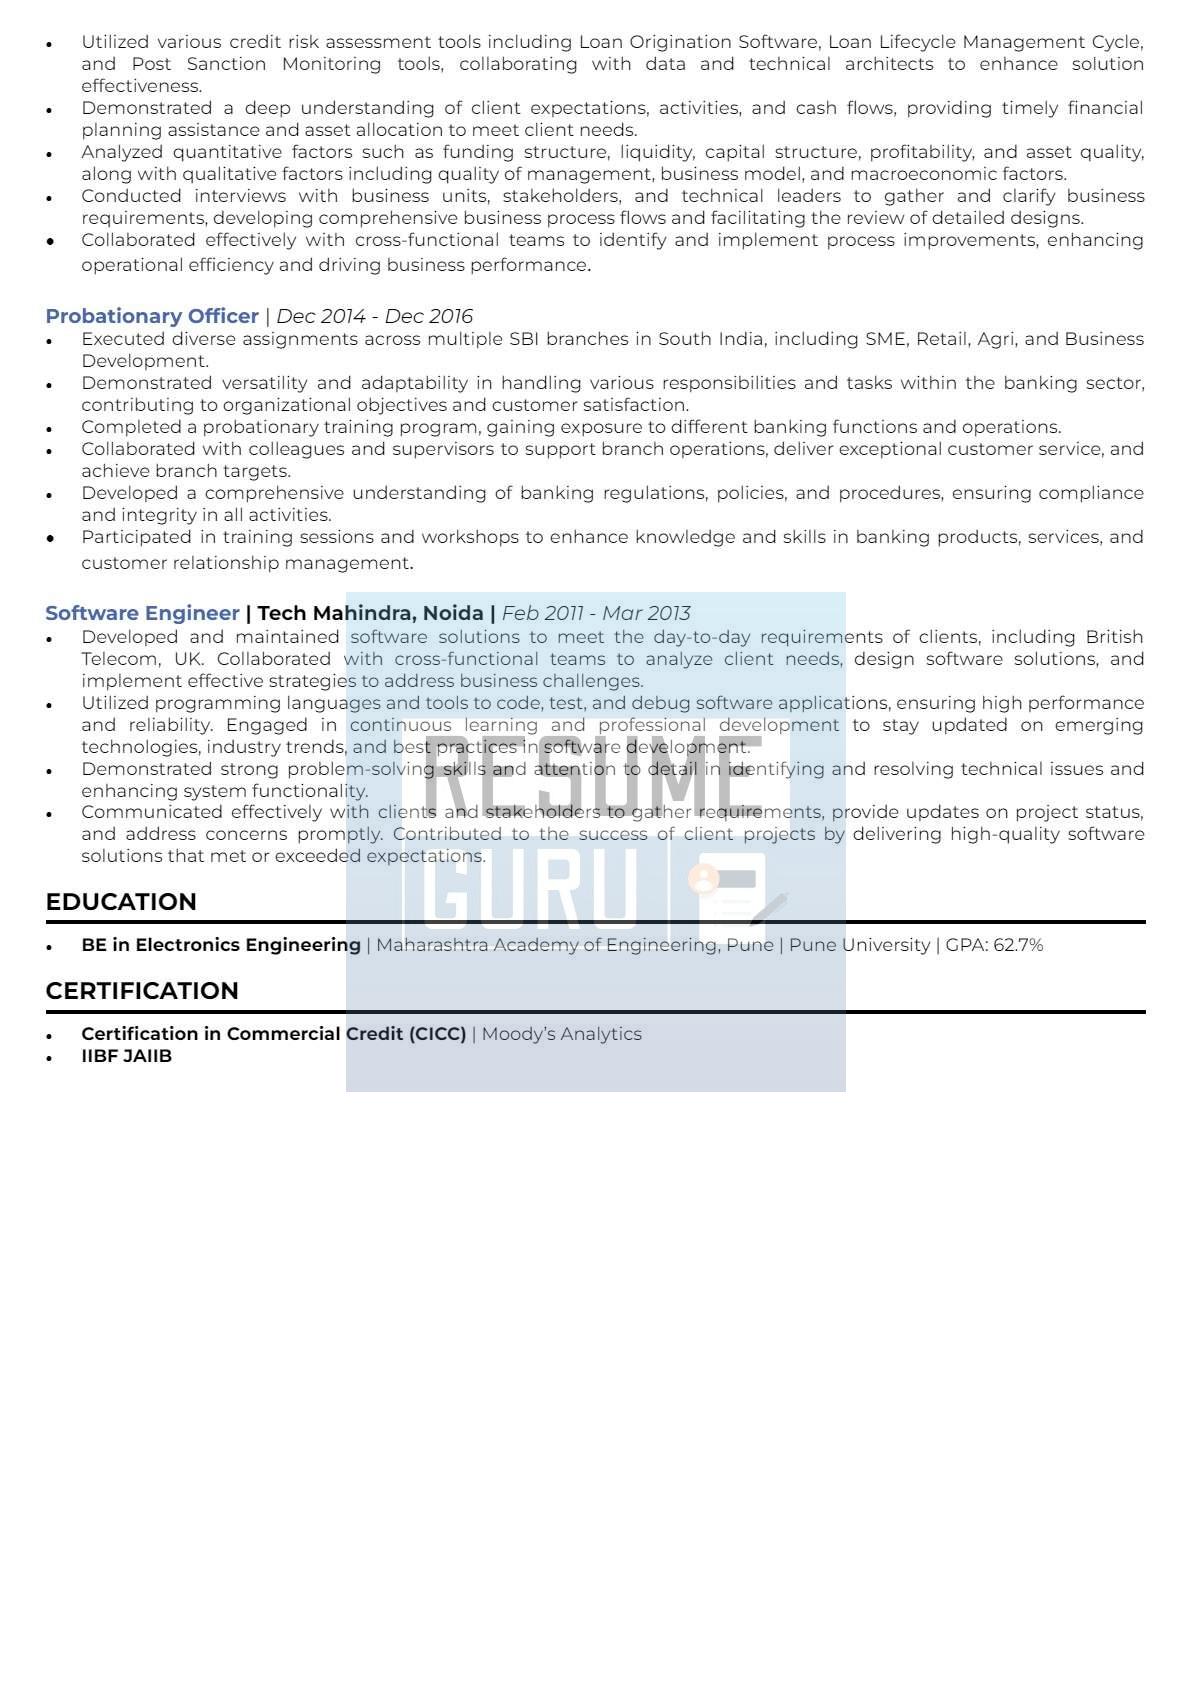 Mid-Level Banking and Credit Analyst Resume_2